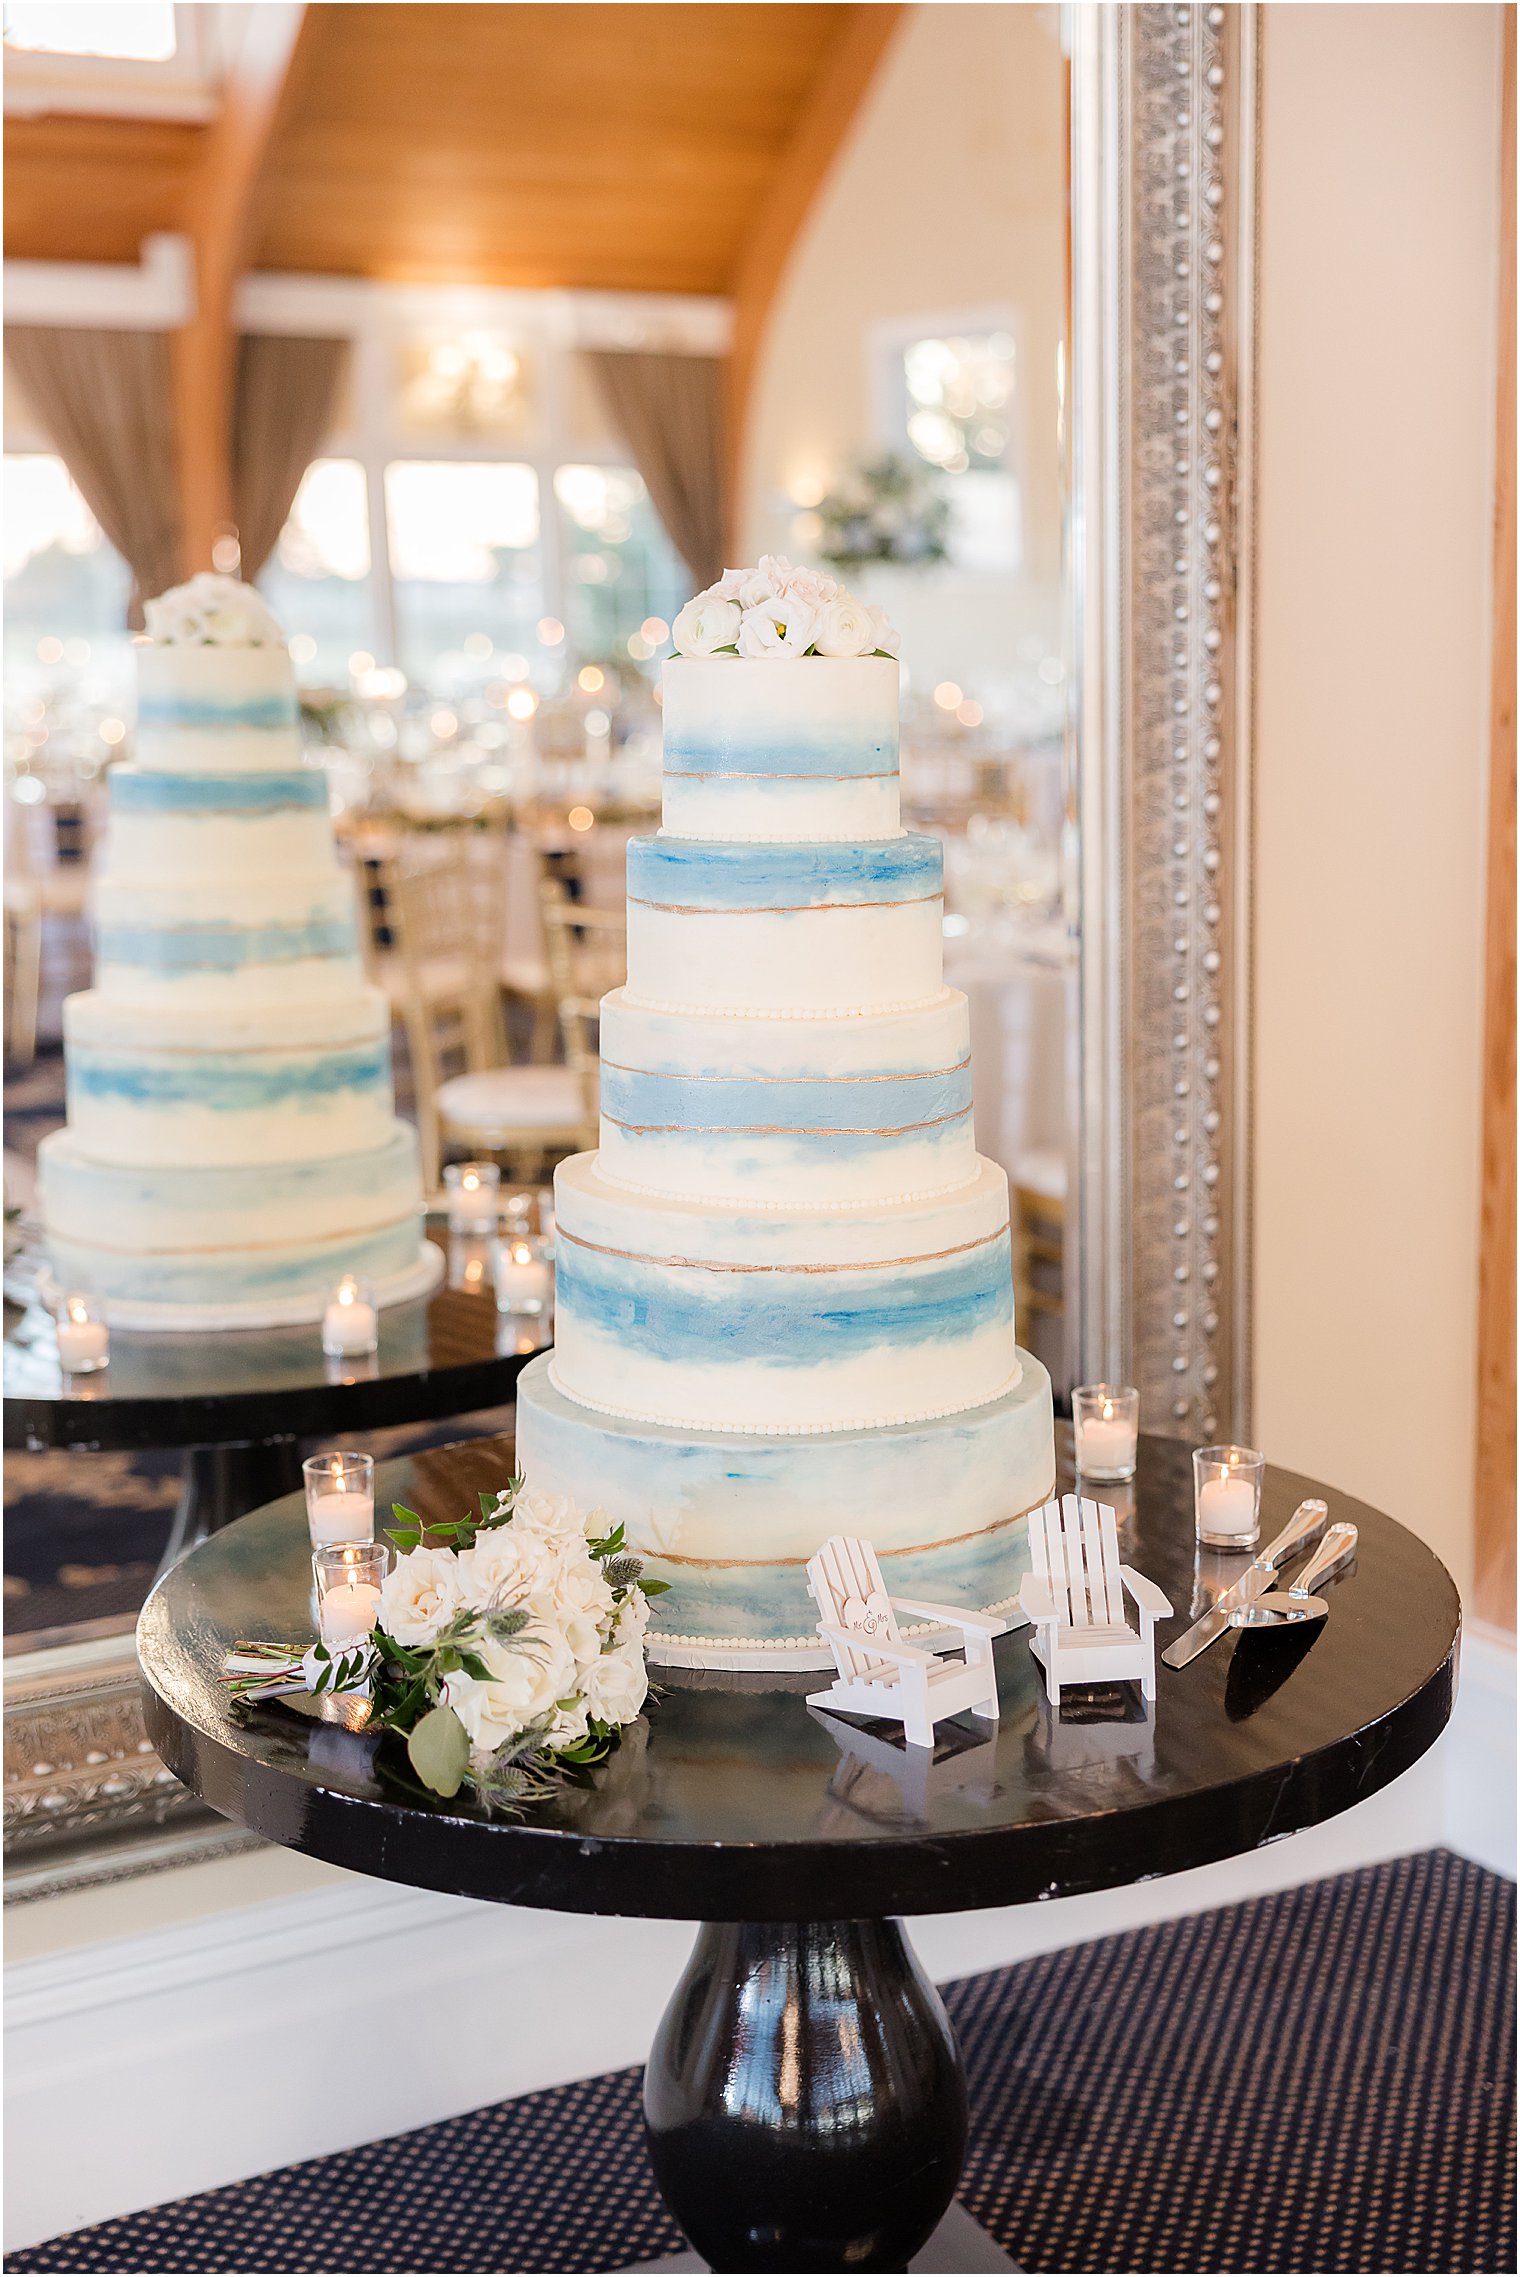 tiered wedding cake with blue icing and wooden chair details 